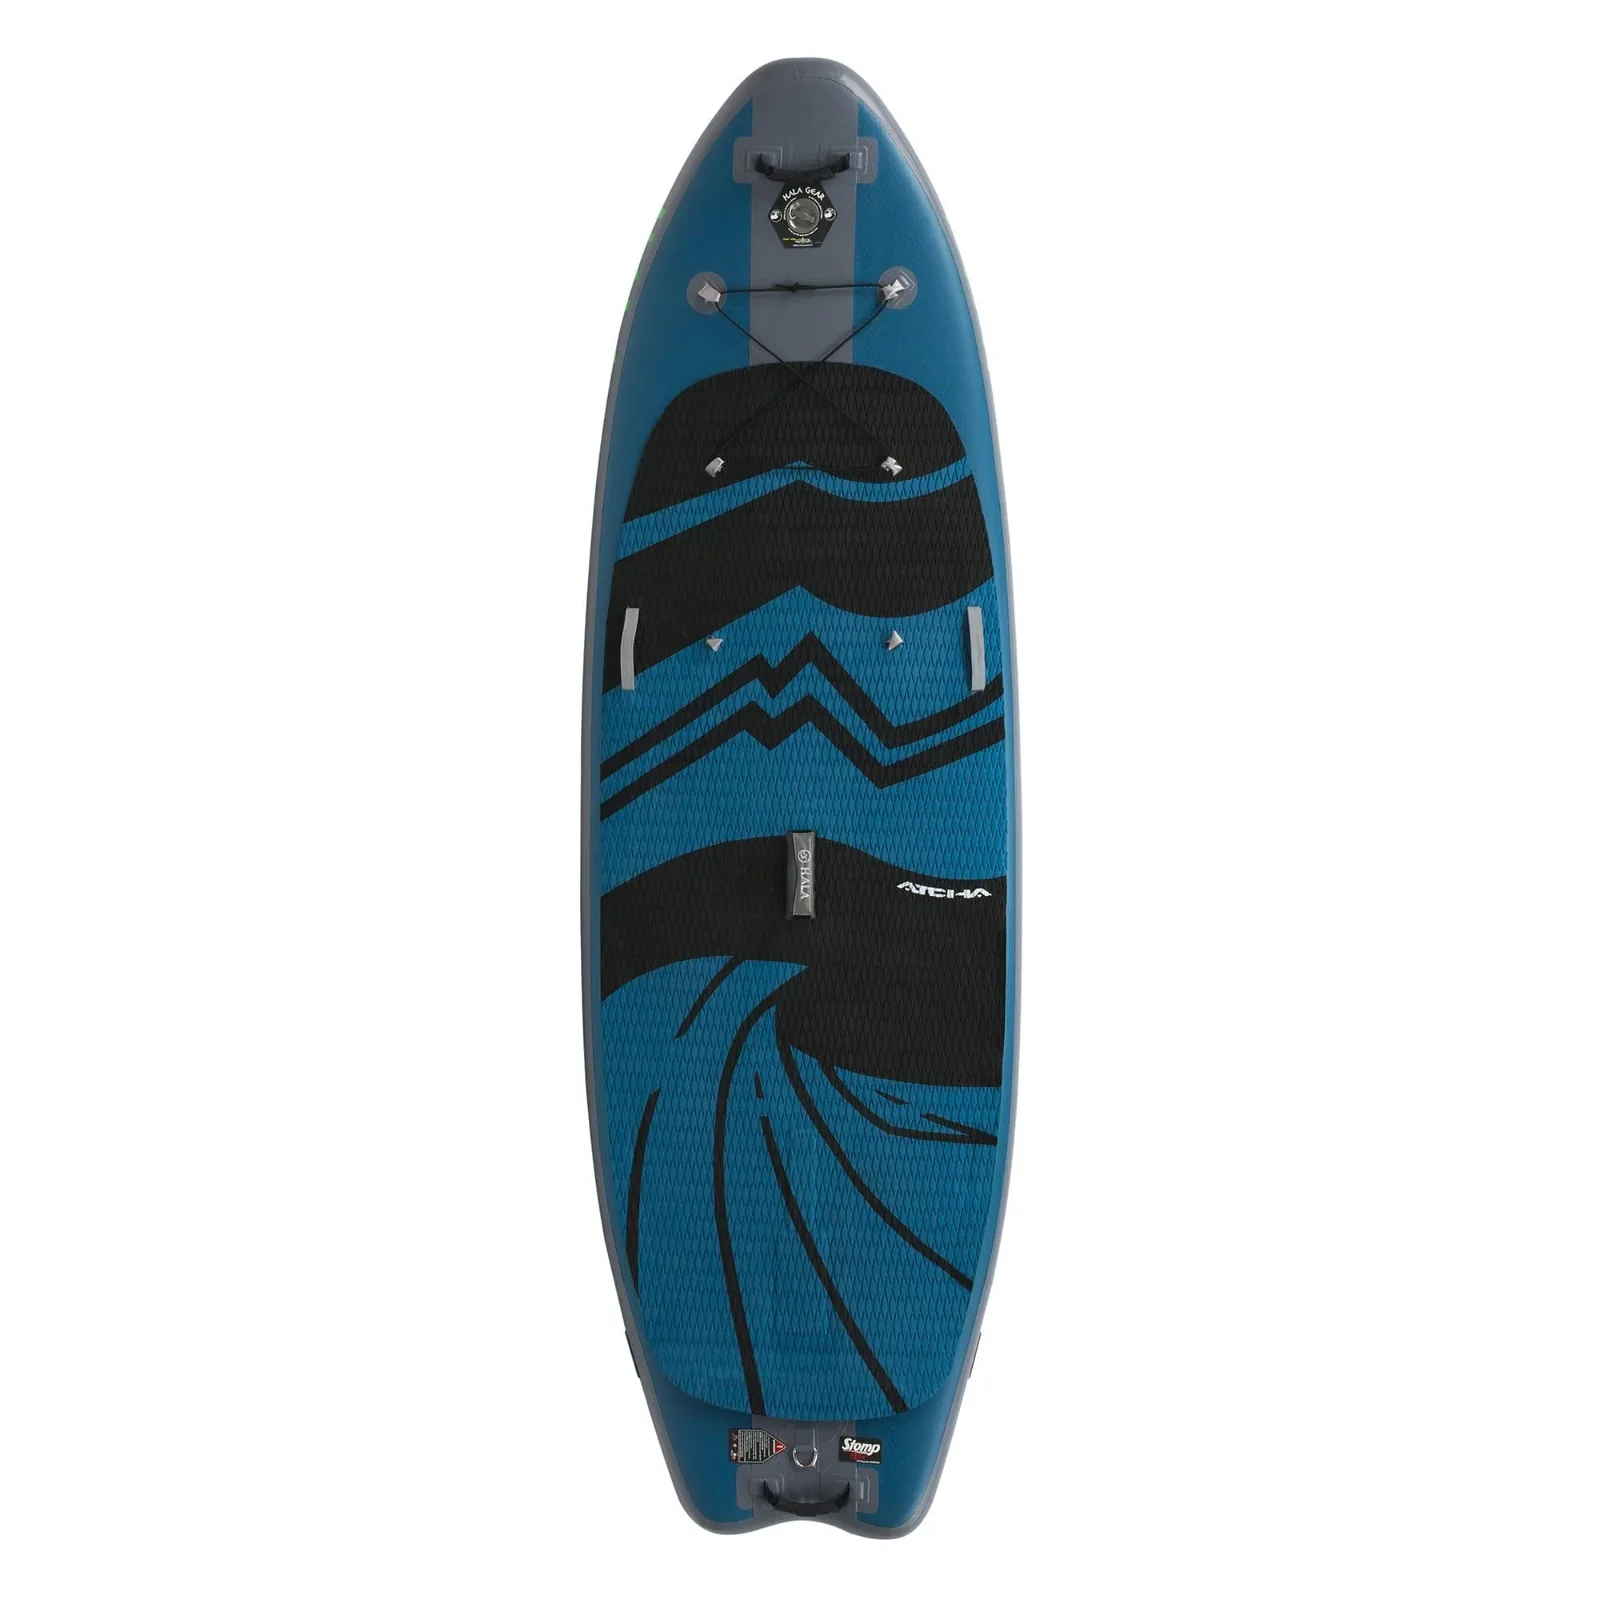 Image of Hala Gear Atcha 96 Inflatable Whitewater SUP